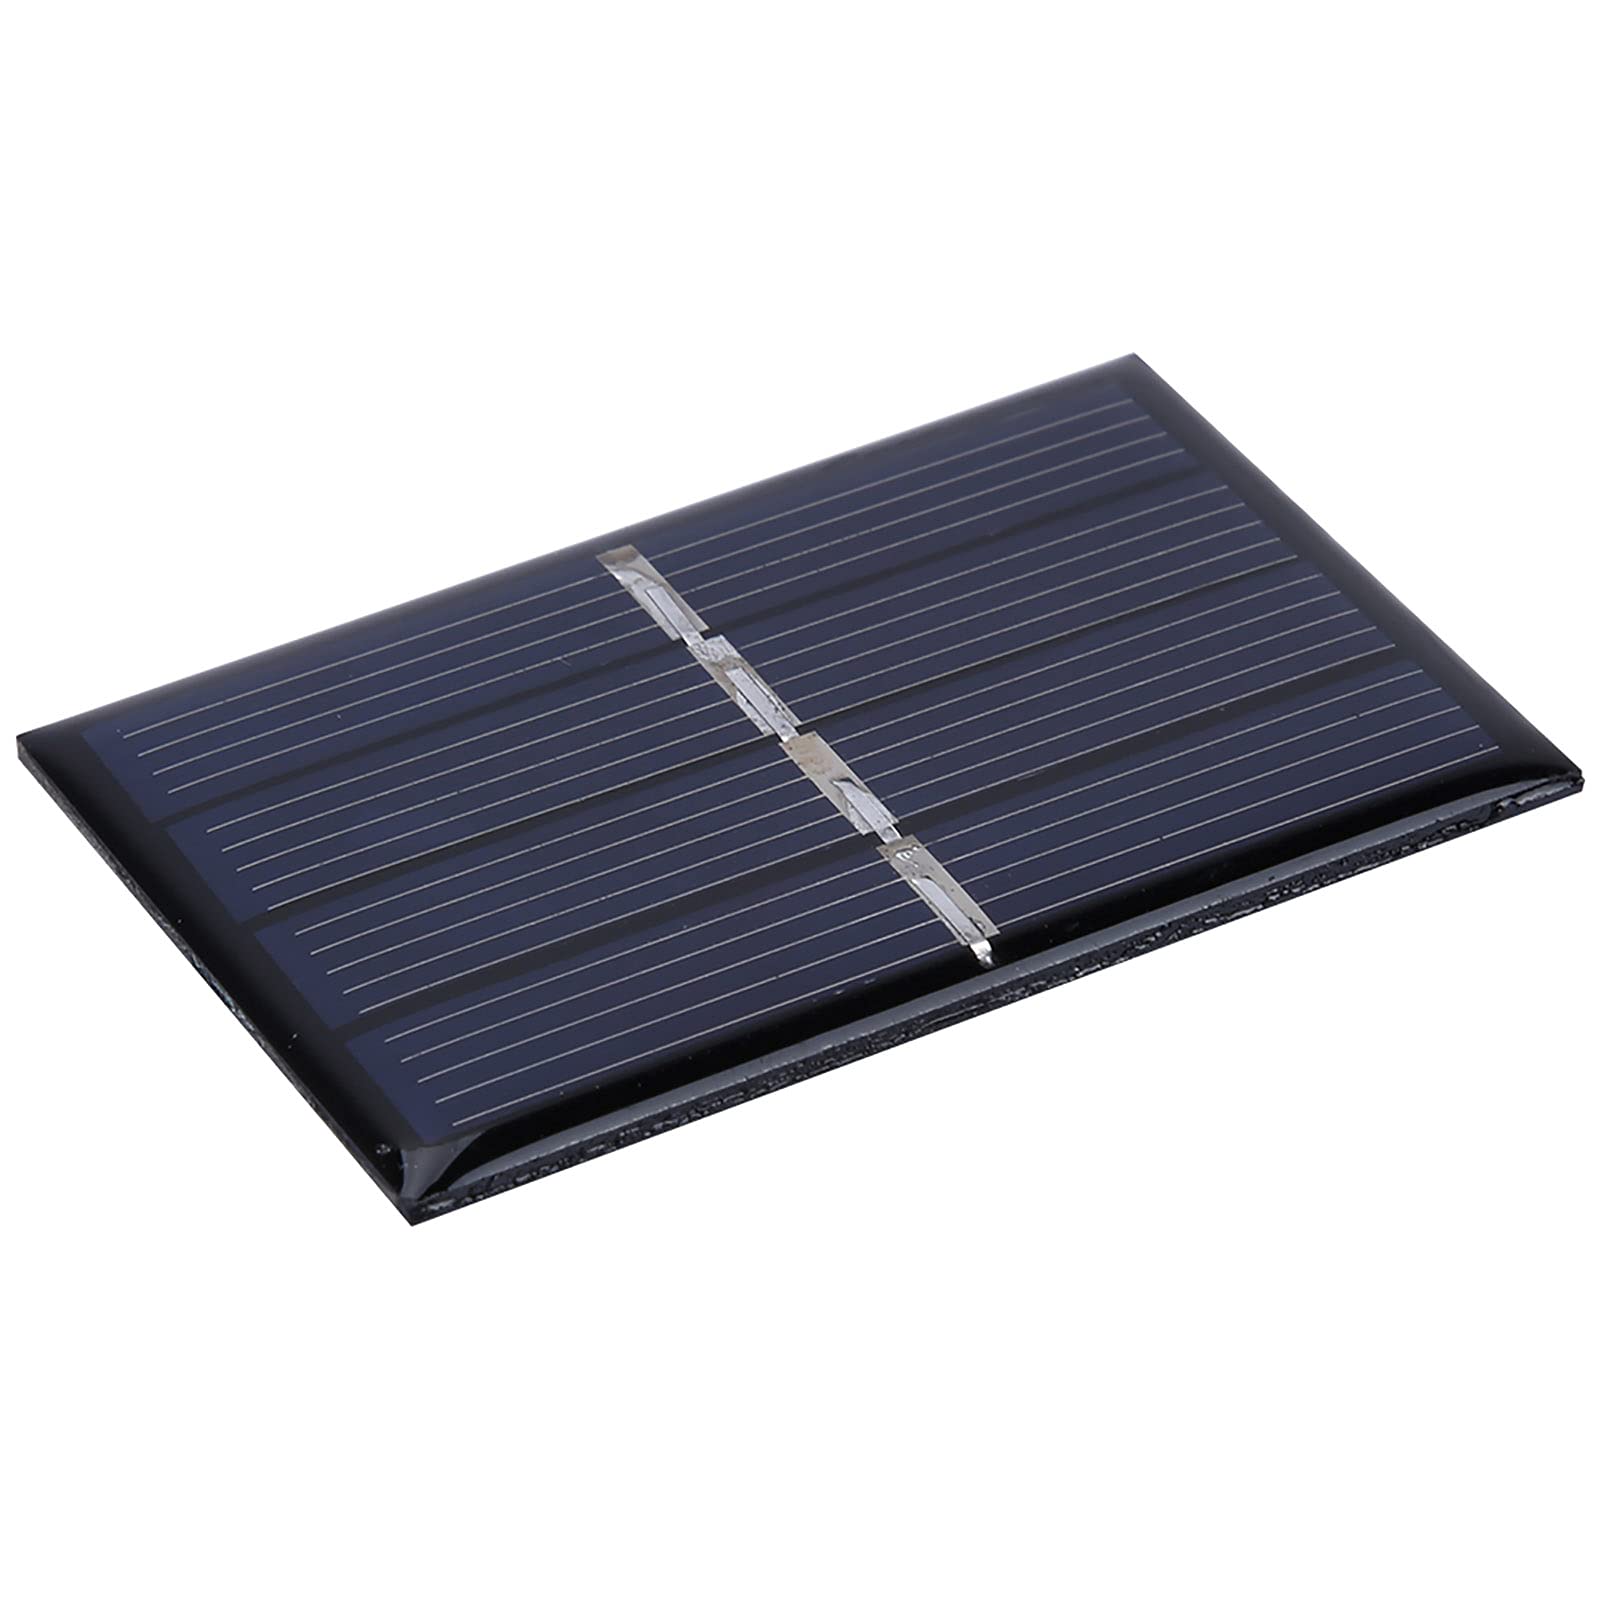 Efficient and Portable 2V 0.28W Mini Solar Panel Battery Charger - Ideal for Outdoor Charging of Small Appliances and Solar Systems